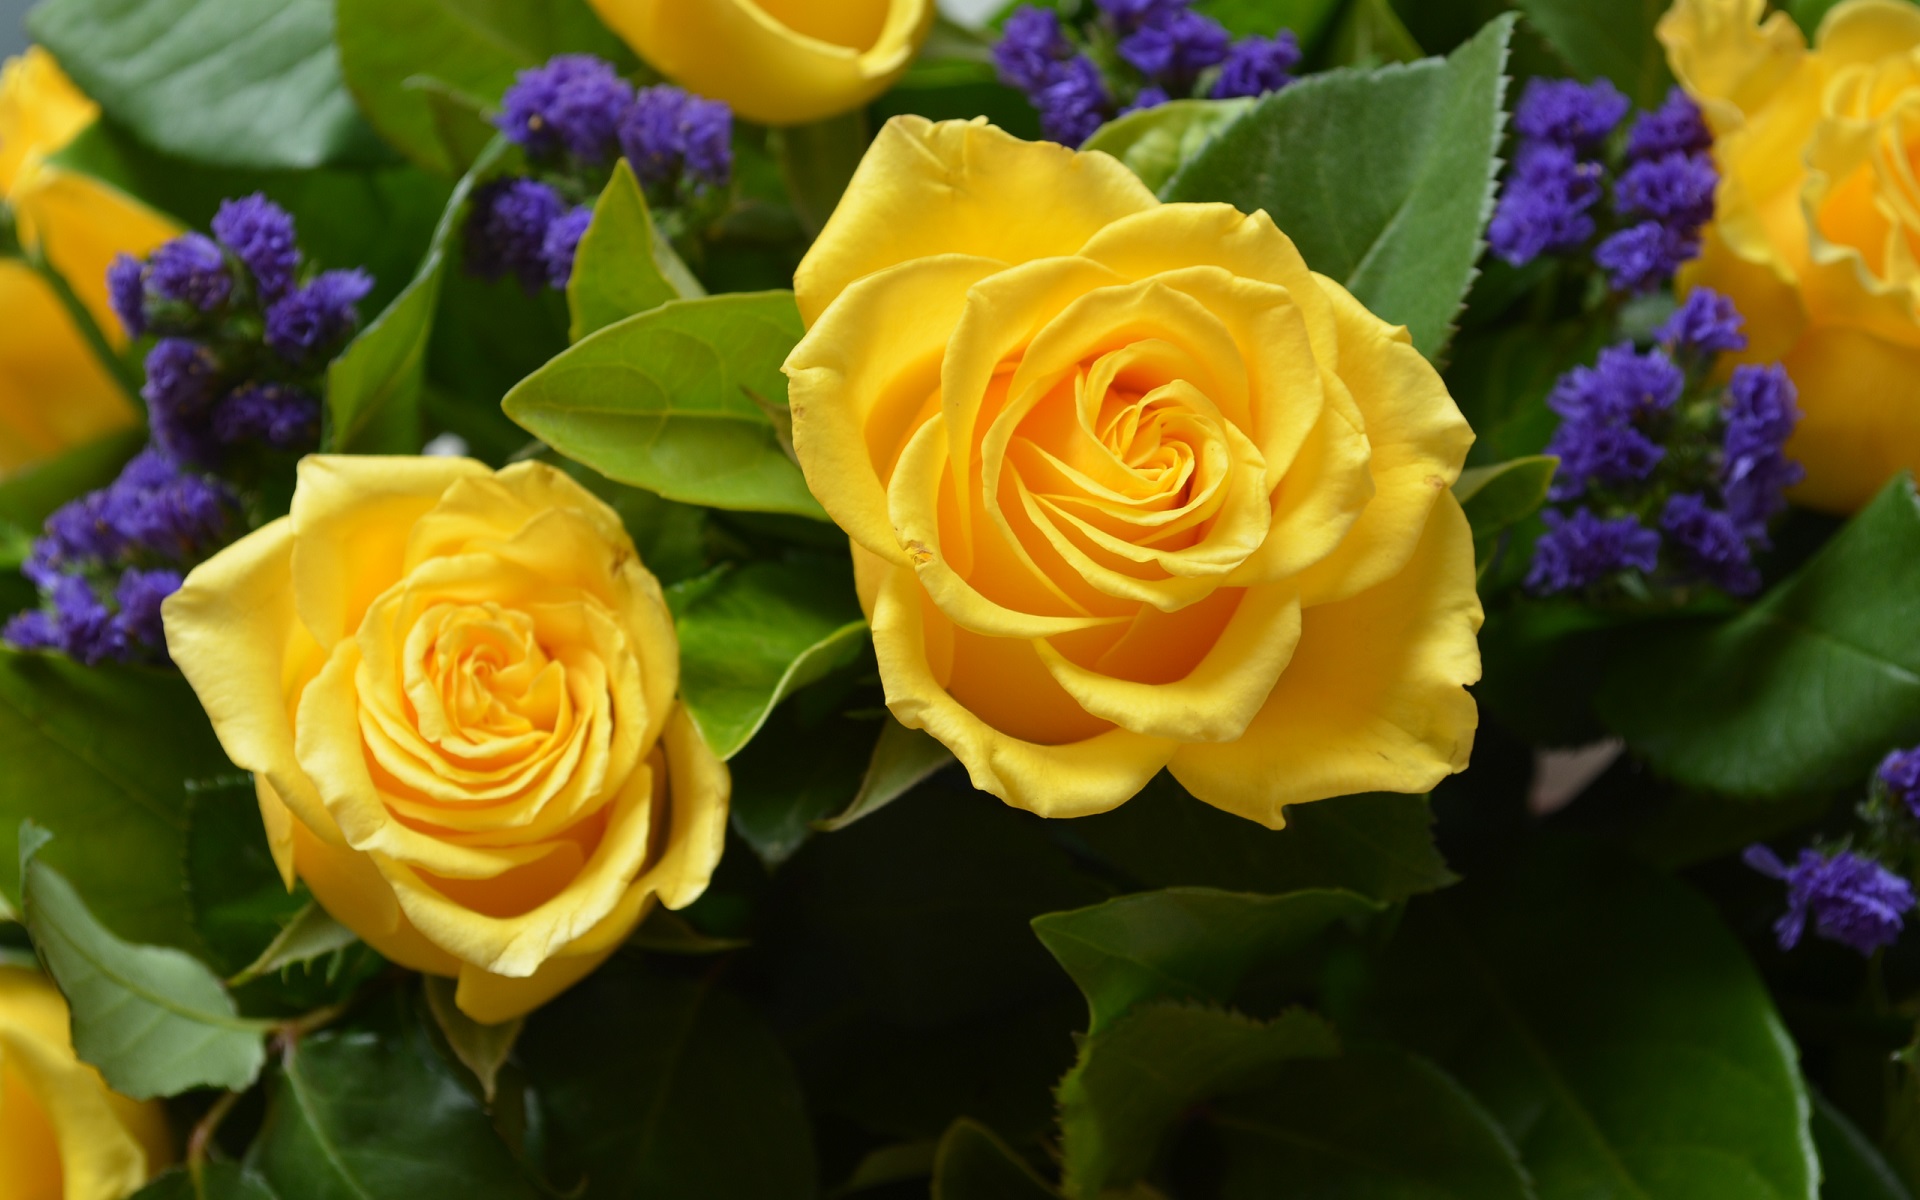 yellow flower, nature, flowers, earth, rose, flower, yellow rose